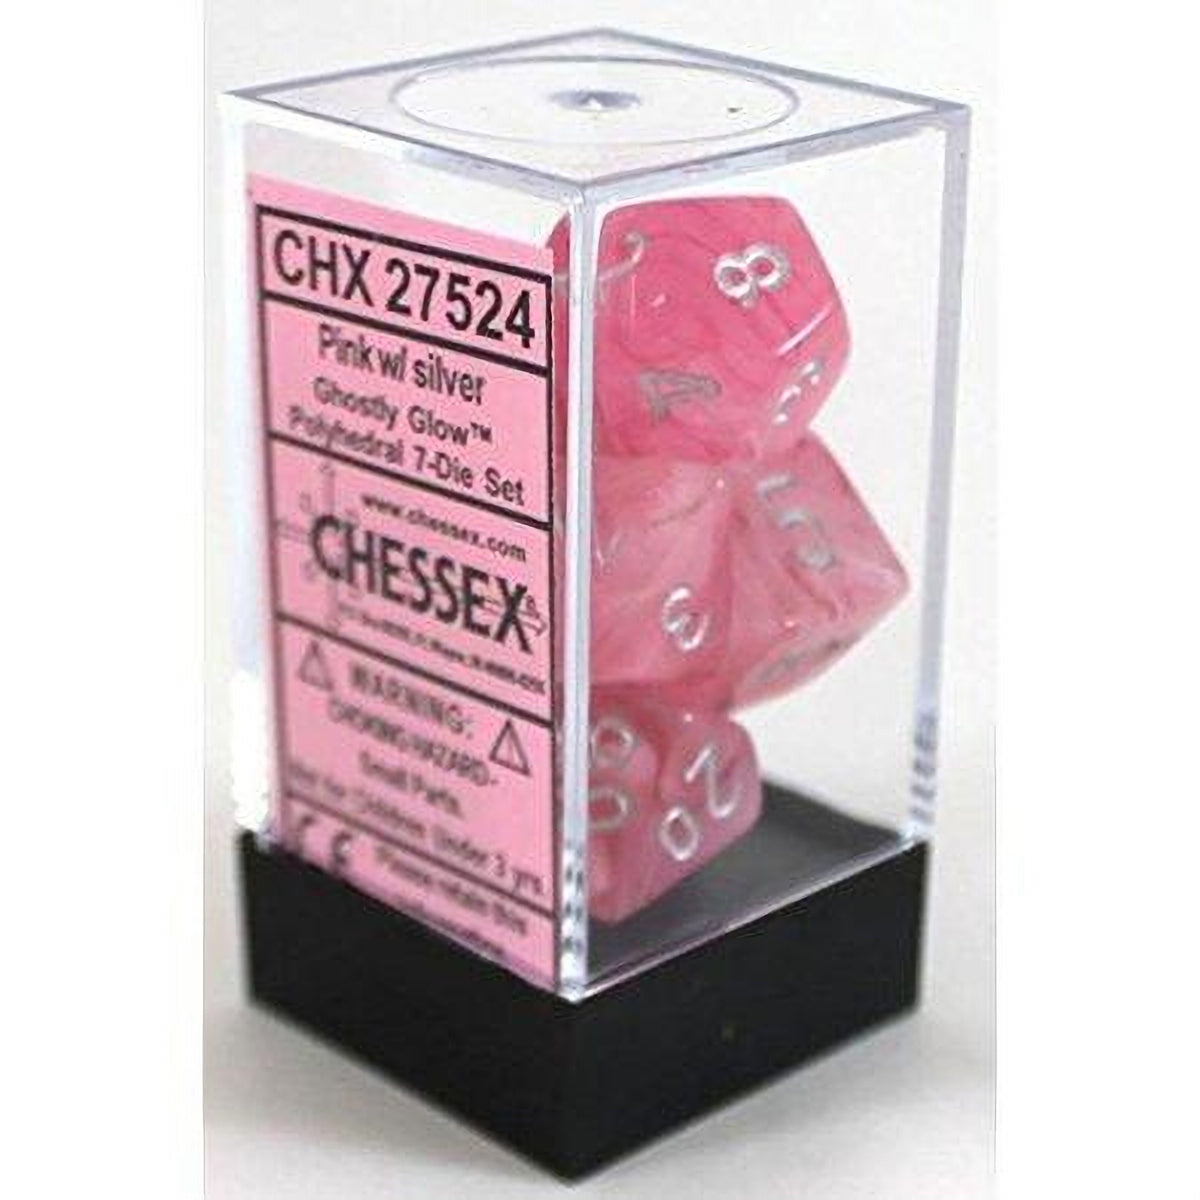 Chessex - Ghostly Polyhedral 7-Die Set - Pink/Silver (CHX27524)